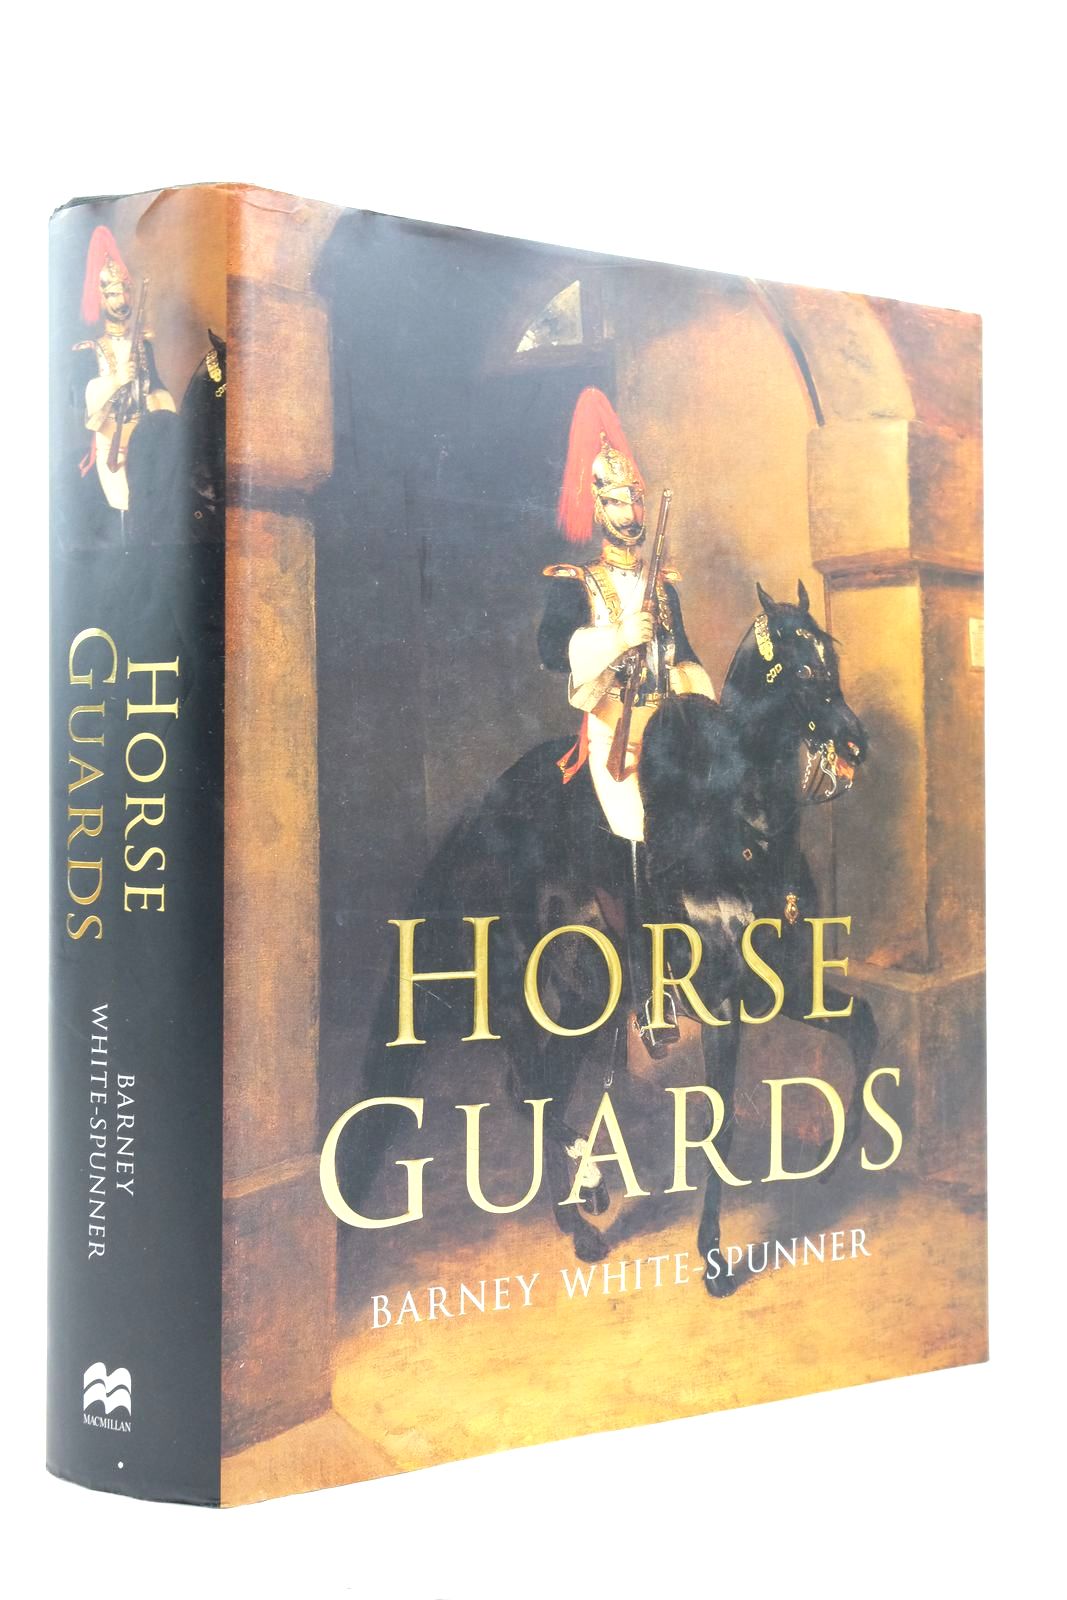 Photo of HORSE GUARDS written by White-Spunner, Barney published by MacMillan (STOCK CODE: 2137524)  for sale by Stella & Rose's Books